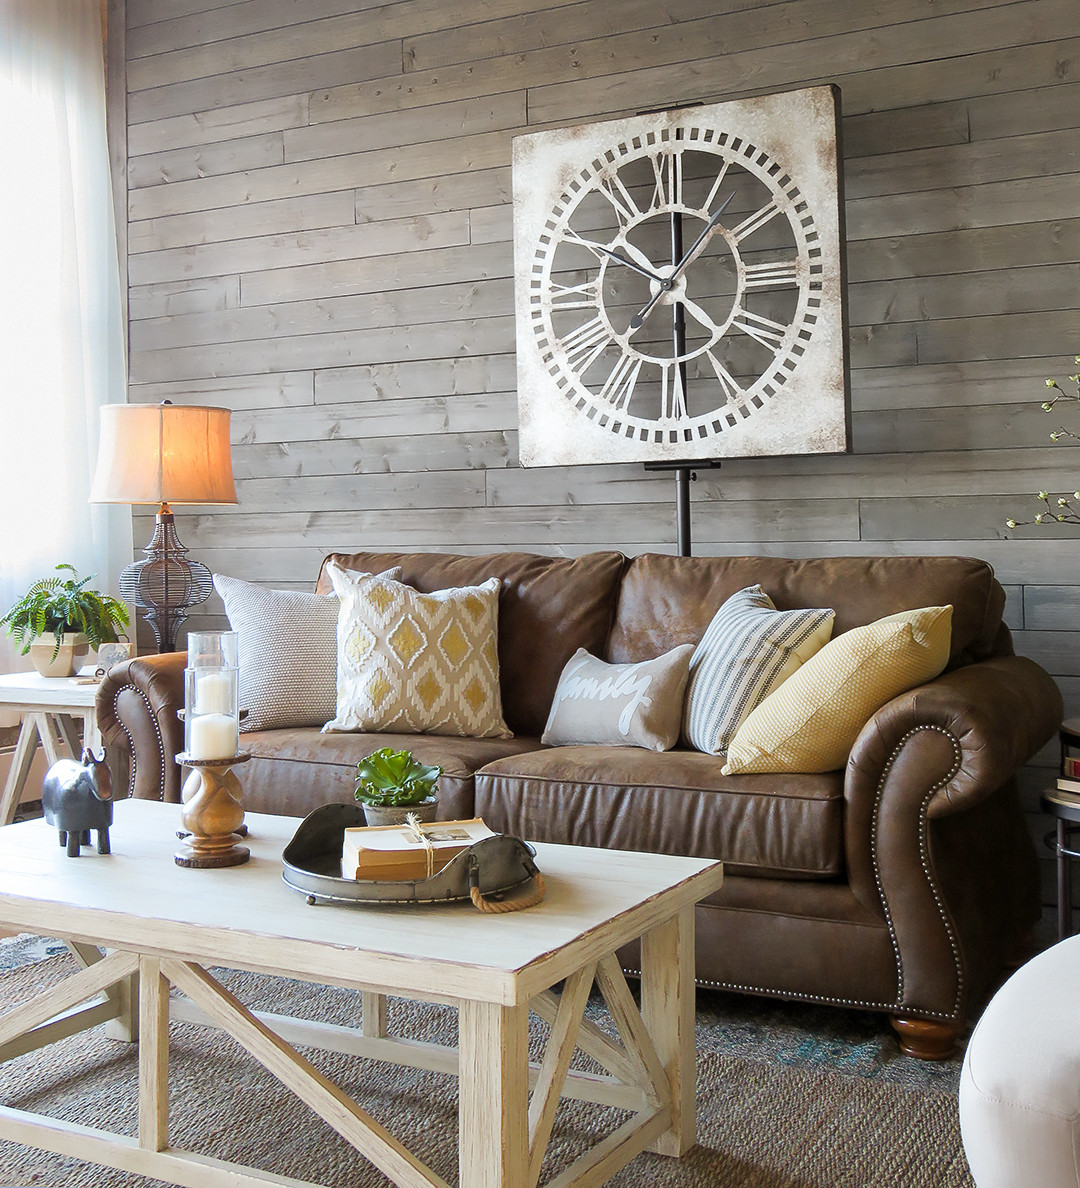 Farmhouse Living Room Furniture
 A Farmhouse Living Room That Will Make You Want A Brown